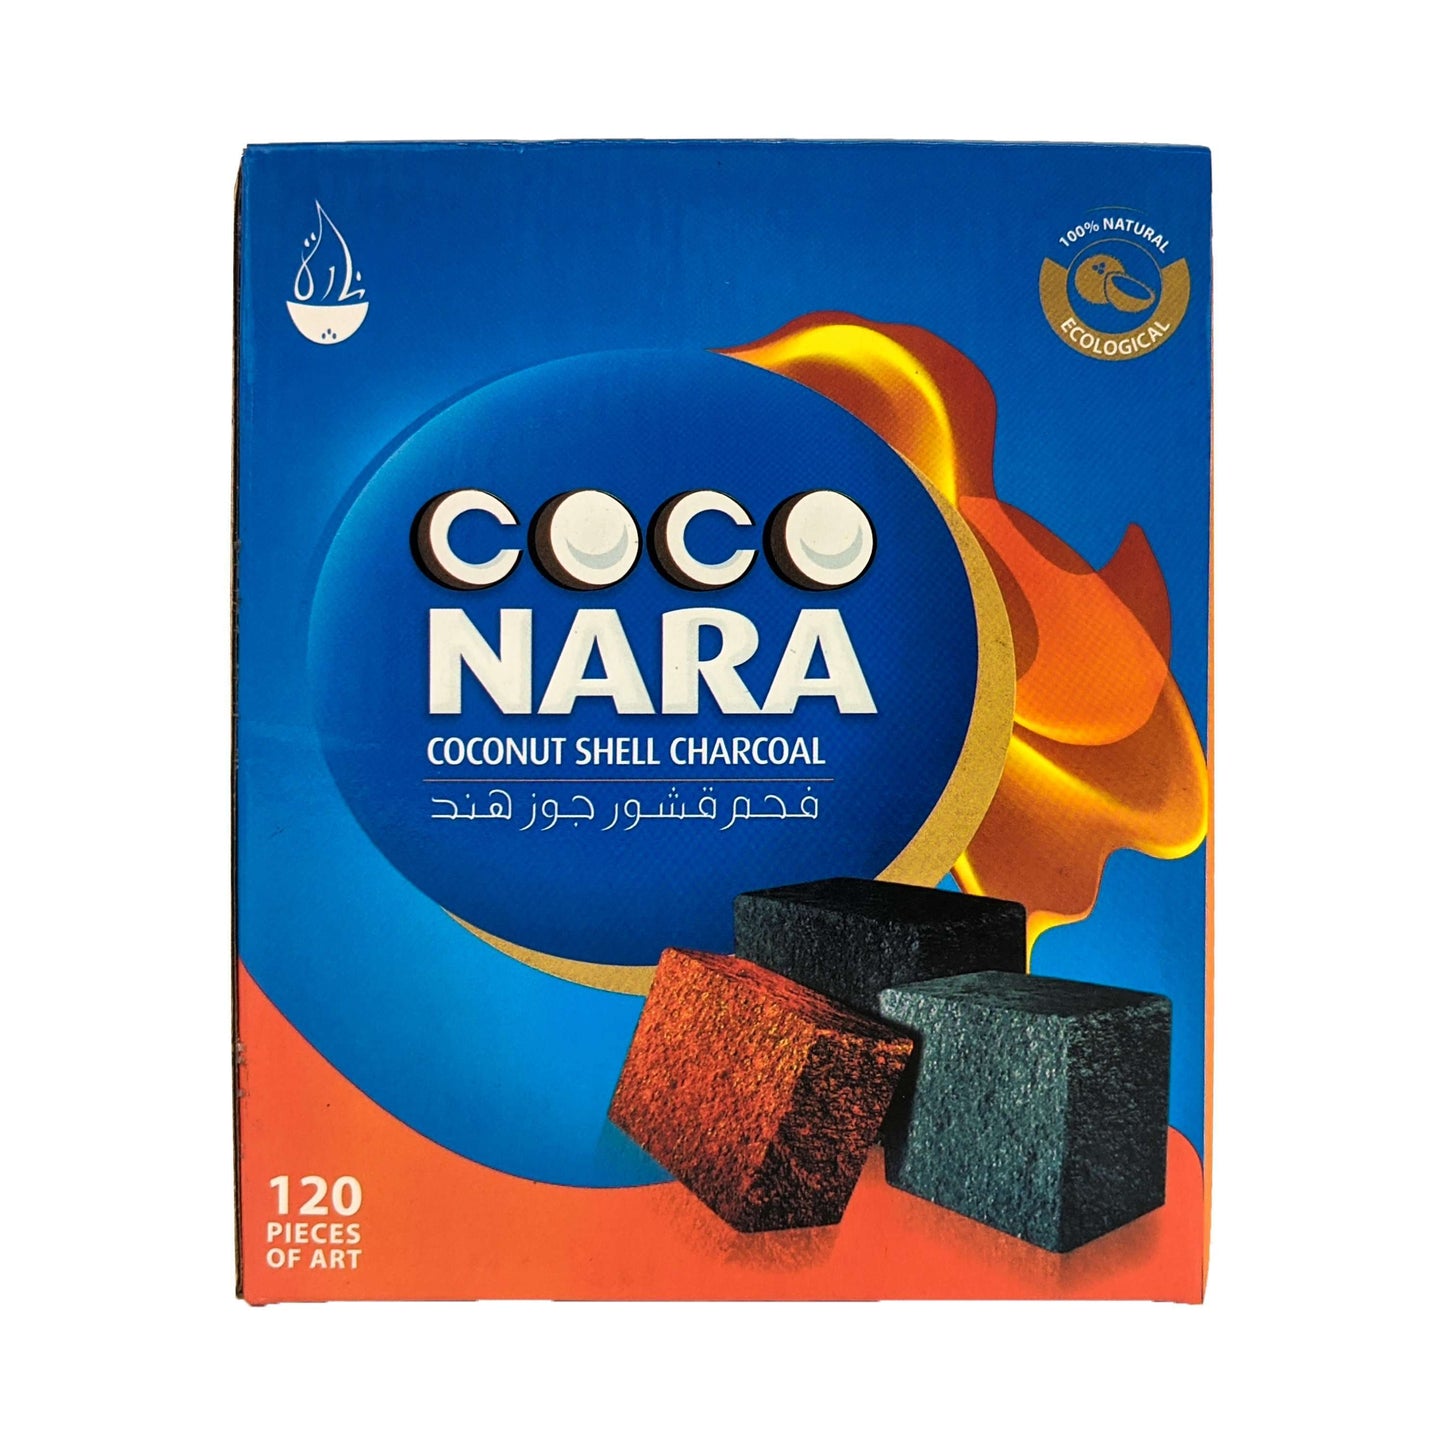 Coco Nara Coconut Shell Charcoal, 120 Pieces